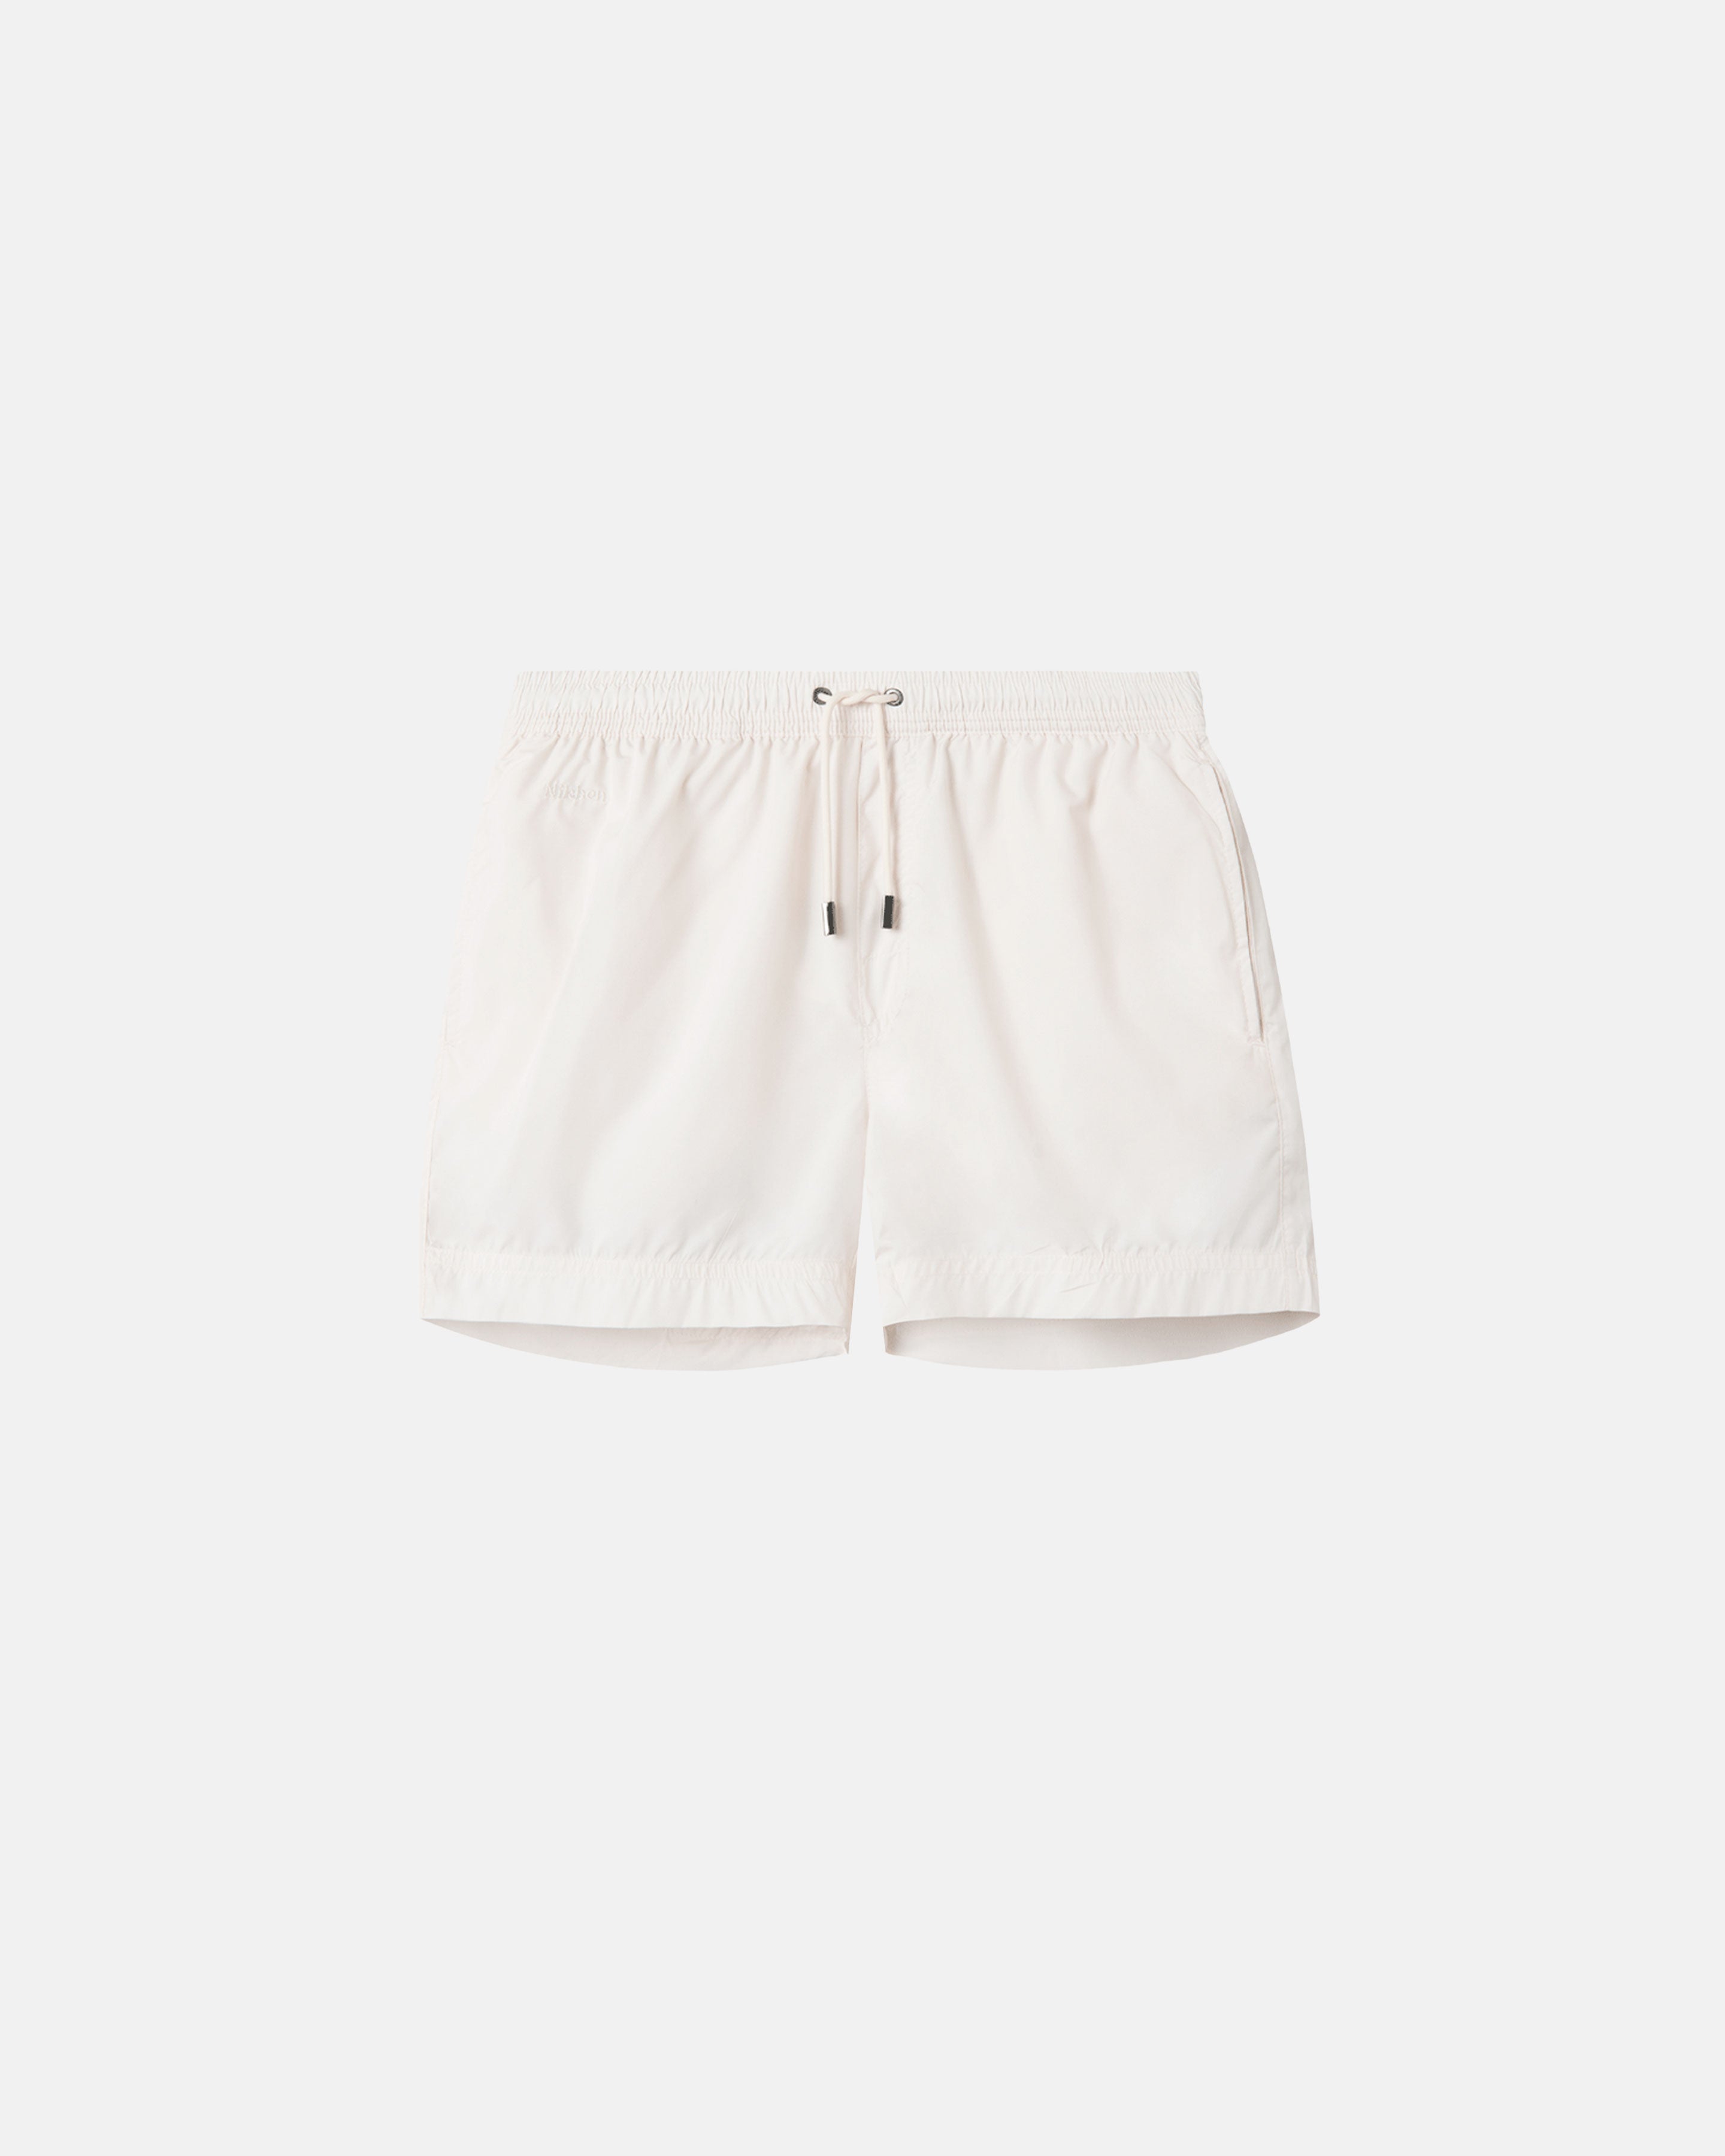 Cream white swim trunks. Mid length with drawstring and two side pockets.